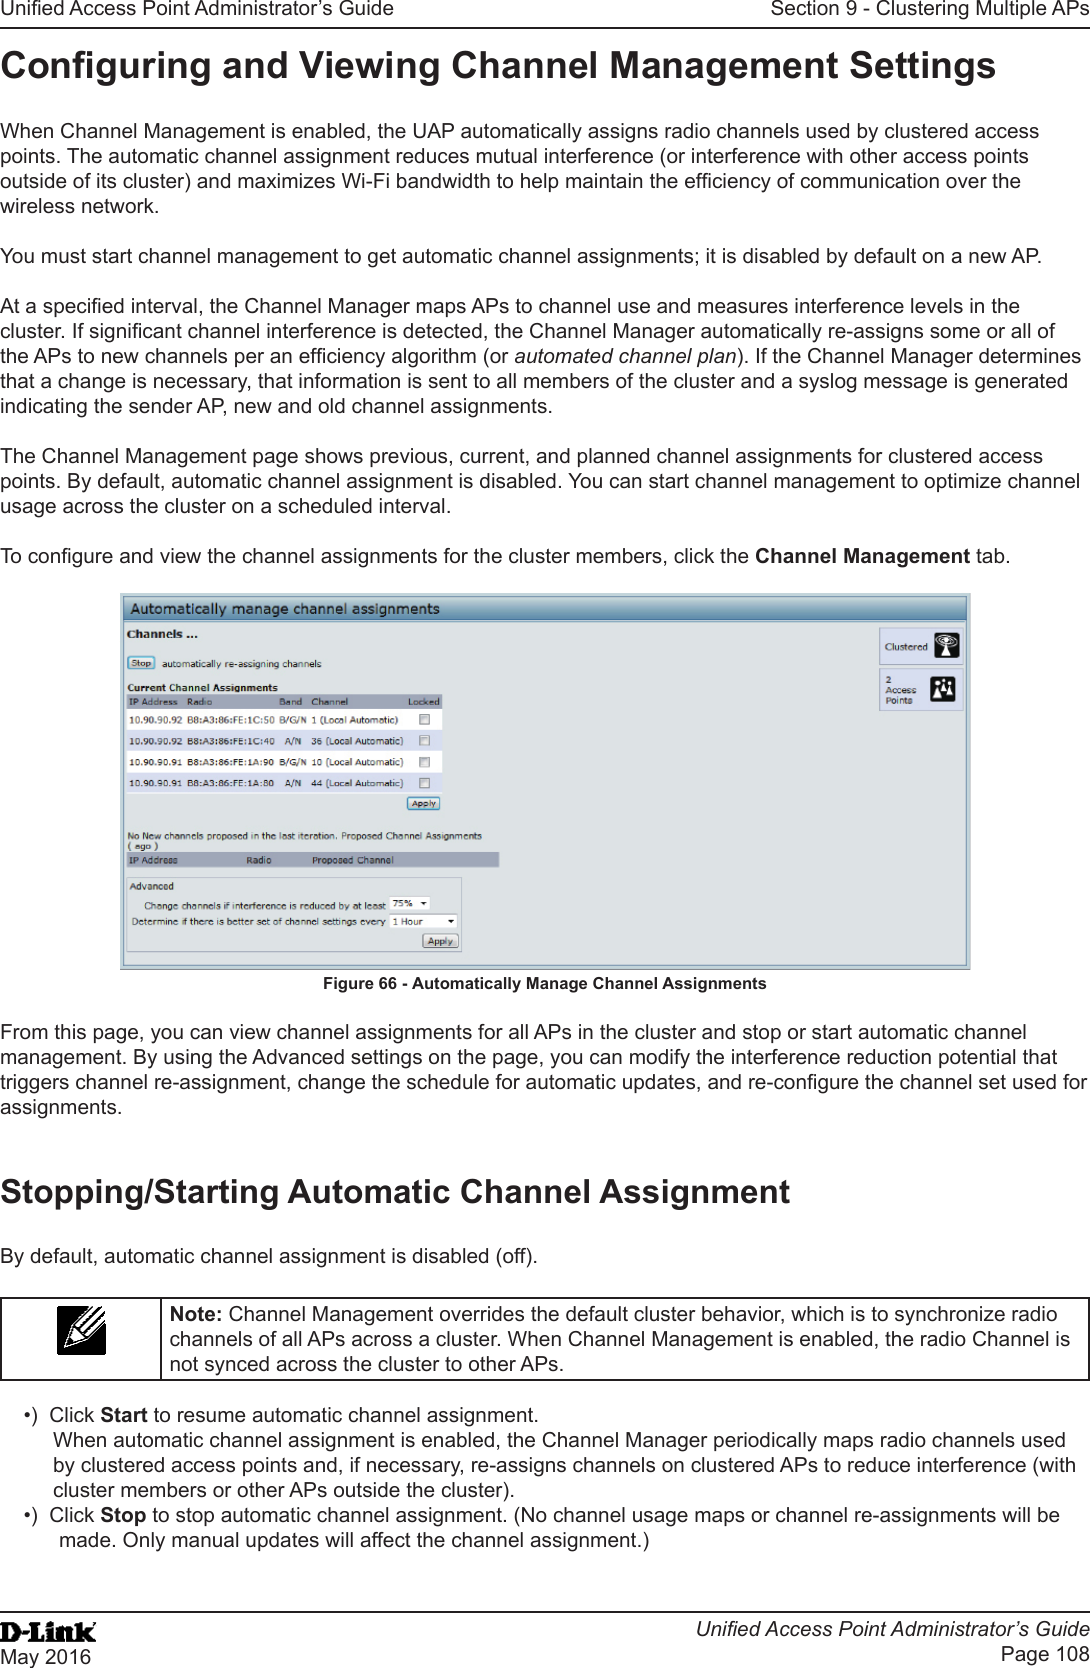 Unied Access Point Administrator’s GuideUnied Access Point Administrator’s GuidePage 108May 2016Section 9 - Clustering Multiple APsConguring and Viewing Channel Management SettingsWhen Channel Management is enabled, the UAP automatically assigns radio channels used by clustered access points. The automatic channel assignment reduces mutual interference (or interference with other access points outside of its cluster) and maximizes Wi-Fi bandwidth to help maintain the efciency of communication over the wireless network.You must start channel management to get automatic channel assignments; it is disabled by default on a new AP.At a specied interval, the Channel Manager maps APs to channel use and measures interference levels in the cluster. If signicant channel interference is detected, the Channel Manager automatically re-assigns some or all of the APs to new channels per an efciency algorithm (or automated channel plan). If the Channel Manager determines that a change is necessary, that information is sent to all members of the cluster and a syslog message is generated indicating the sender AP, new and old channel assignments.The Channel Management page shows previous, current, and planned channel assignments for clustered access points. By default, automatic channel assignment is disabled. You can start channel management to optimize channel usage across the cluster on a scheduled interval.To congure and view the channel assignments for the cluster members, click the Channel Management tab.Figure 66 - Automatically Manage Channel AssignmentsFrom this page, you can view channel assignments for all APs in the cluster and stop or start automatic channel management. By using the Advanced settings on the page, you can modify the interference reduction potential that triggers channel re-assignment, change the schedule for automatic updates, and re-congure the channel set used for assignments.Stopping/Starting Automatic Channel AssignmentBy default, automatic channel assignment is disabled (off).Note: Channel Management overrides the default cluster behavior, which is to synchronize radio channels of all APs across a cluster. When Channel Management is enabled, the radio Channel is not synced across the cluster to other APs. •)  Click Start to resume automatic channel assignment.When automatic channel assignment is enabled, the Channel Manager periodically maps radio channels used by clustered access points and, if necessary, re-assigns channels on clustered APs to reduce interference (with cluster members or other APs outside the cluster).•)  Click Stop to stop automatic channel assignment. (No channel usage maps or channel re-assignments will be made. Only manual updates will affect the channel assignment.)